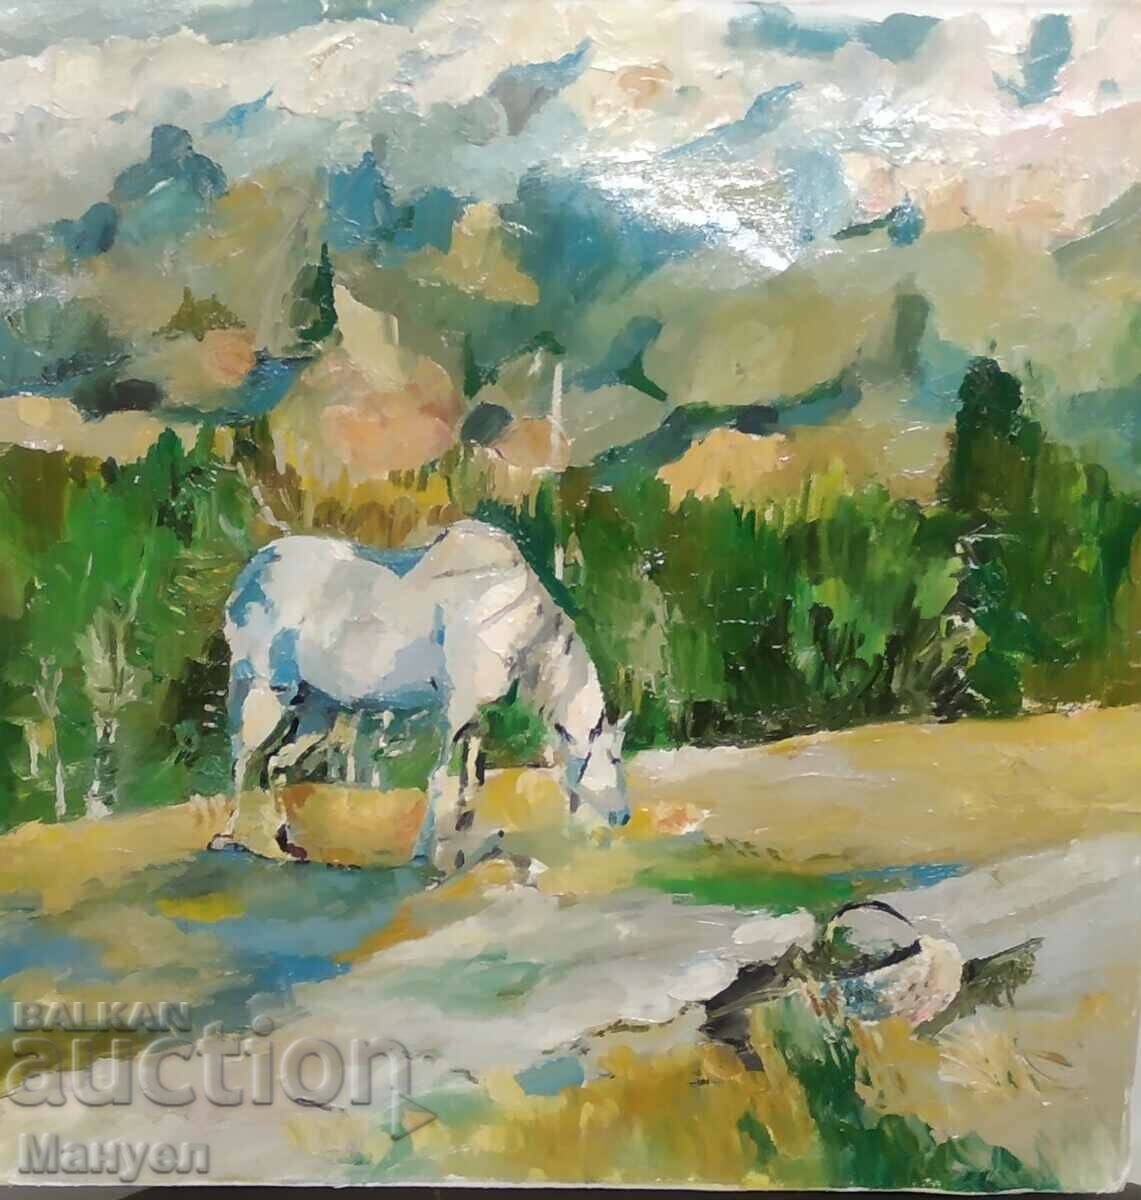 Landscape with a horse.